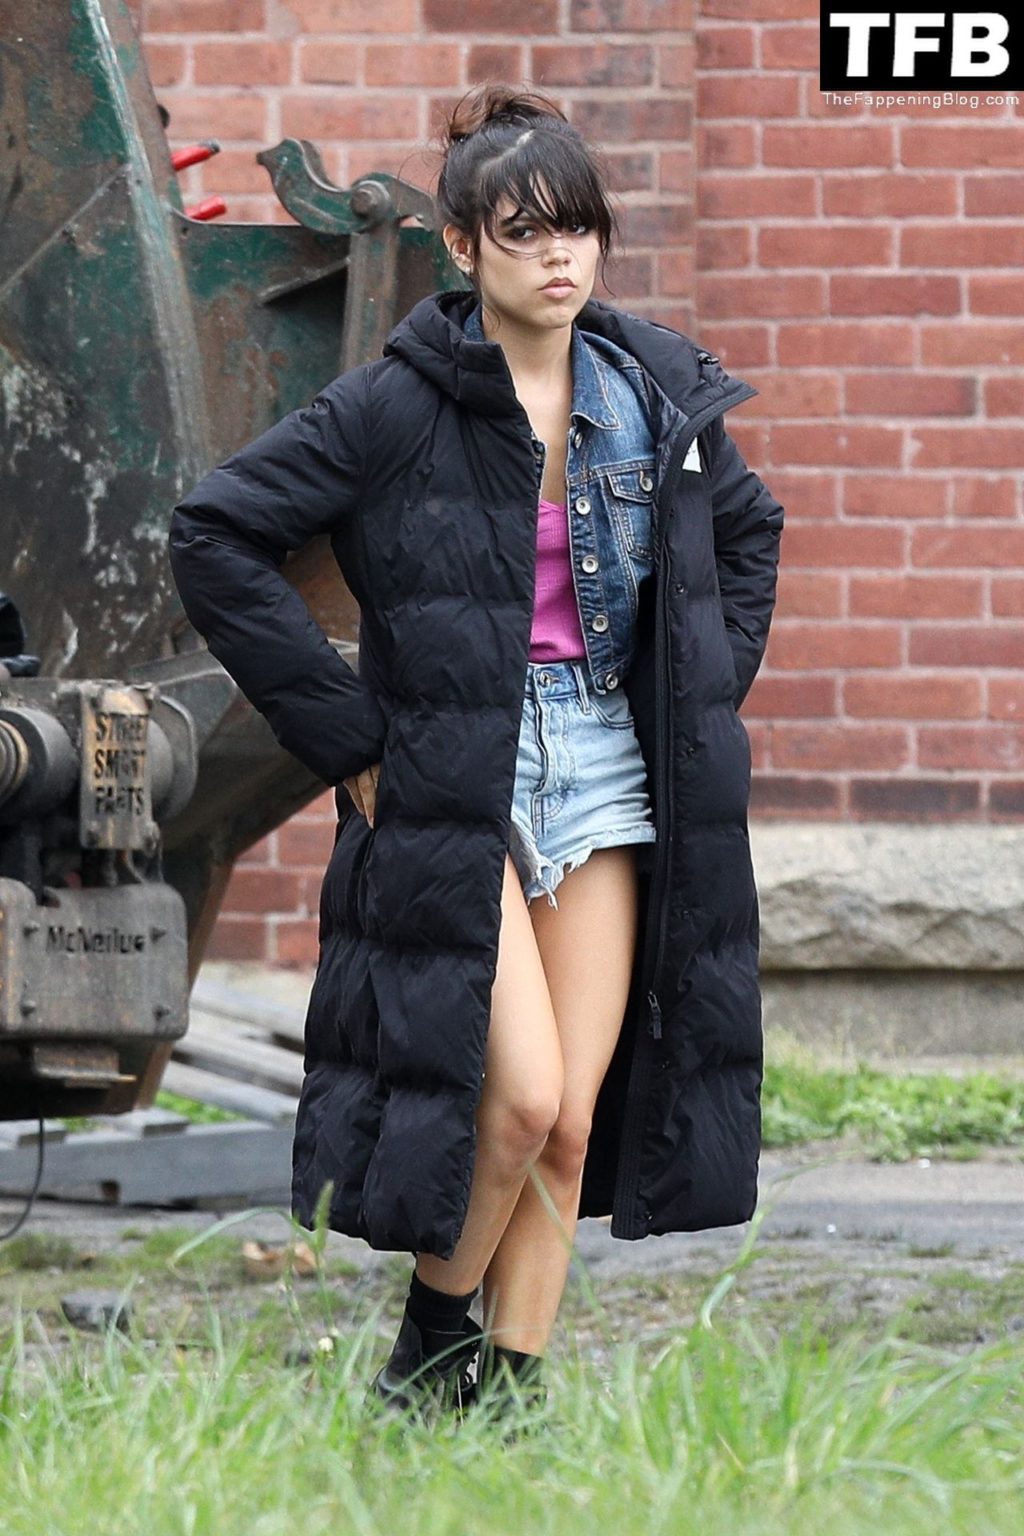 Jenna Ortega Sexy The Fappening Blog 19 1024x1536 - Leggy Jenna Ortega is Spotted in Short Shorts on the Set of “Finest Kind” (24 Photos)